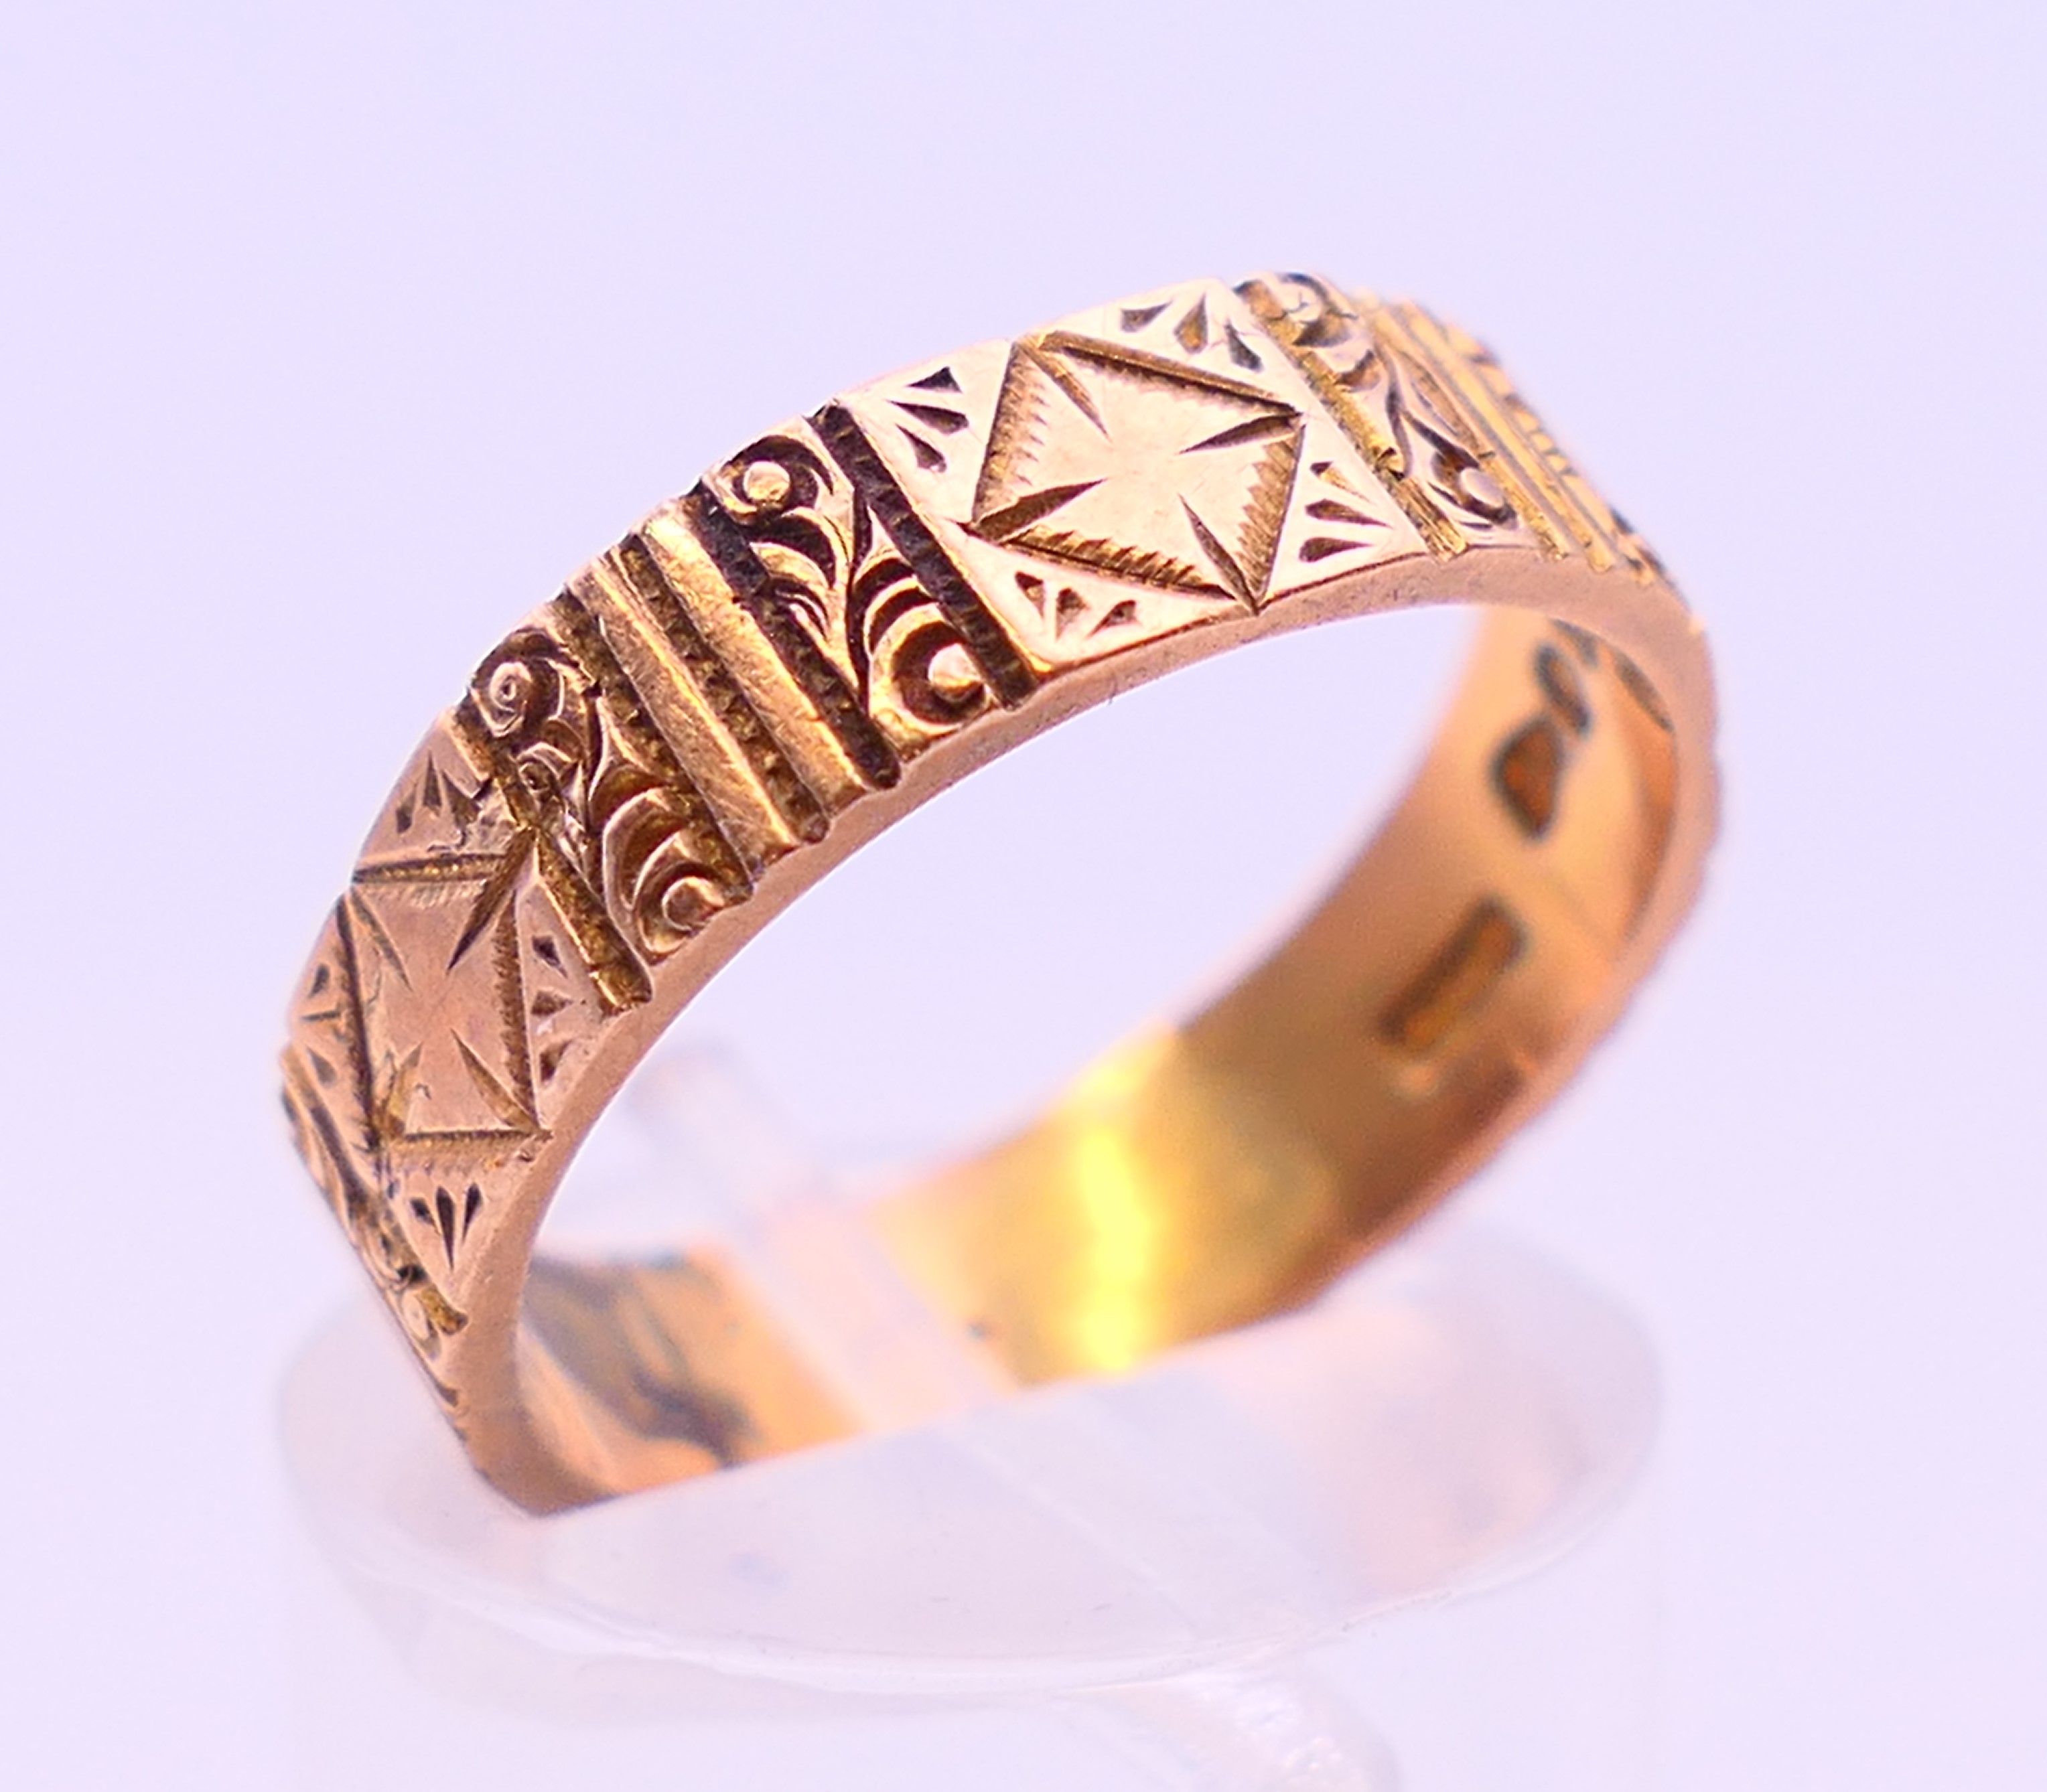 Two 9 ct gold signet rings and a 9 ct gold wedding band. 11.1 grammes total weight. - Image 7 of 13